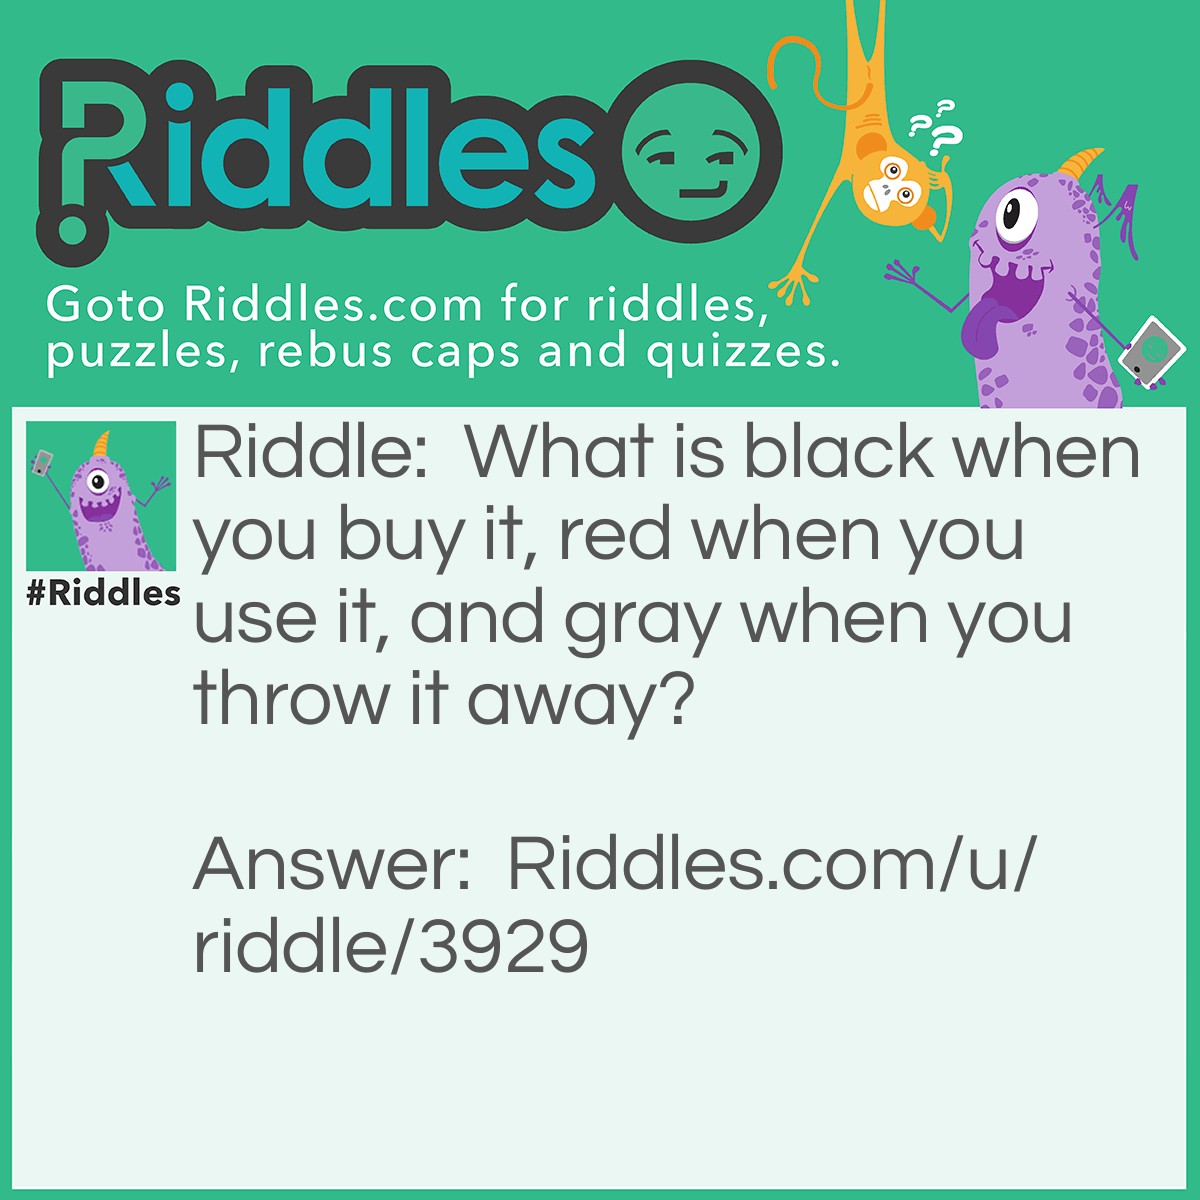 Riddle: What is black when you buy it, red when you use it, and gray when you throw it away? Answer: Charcoal.